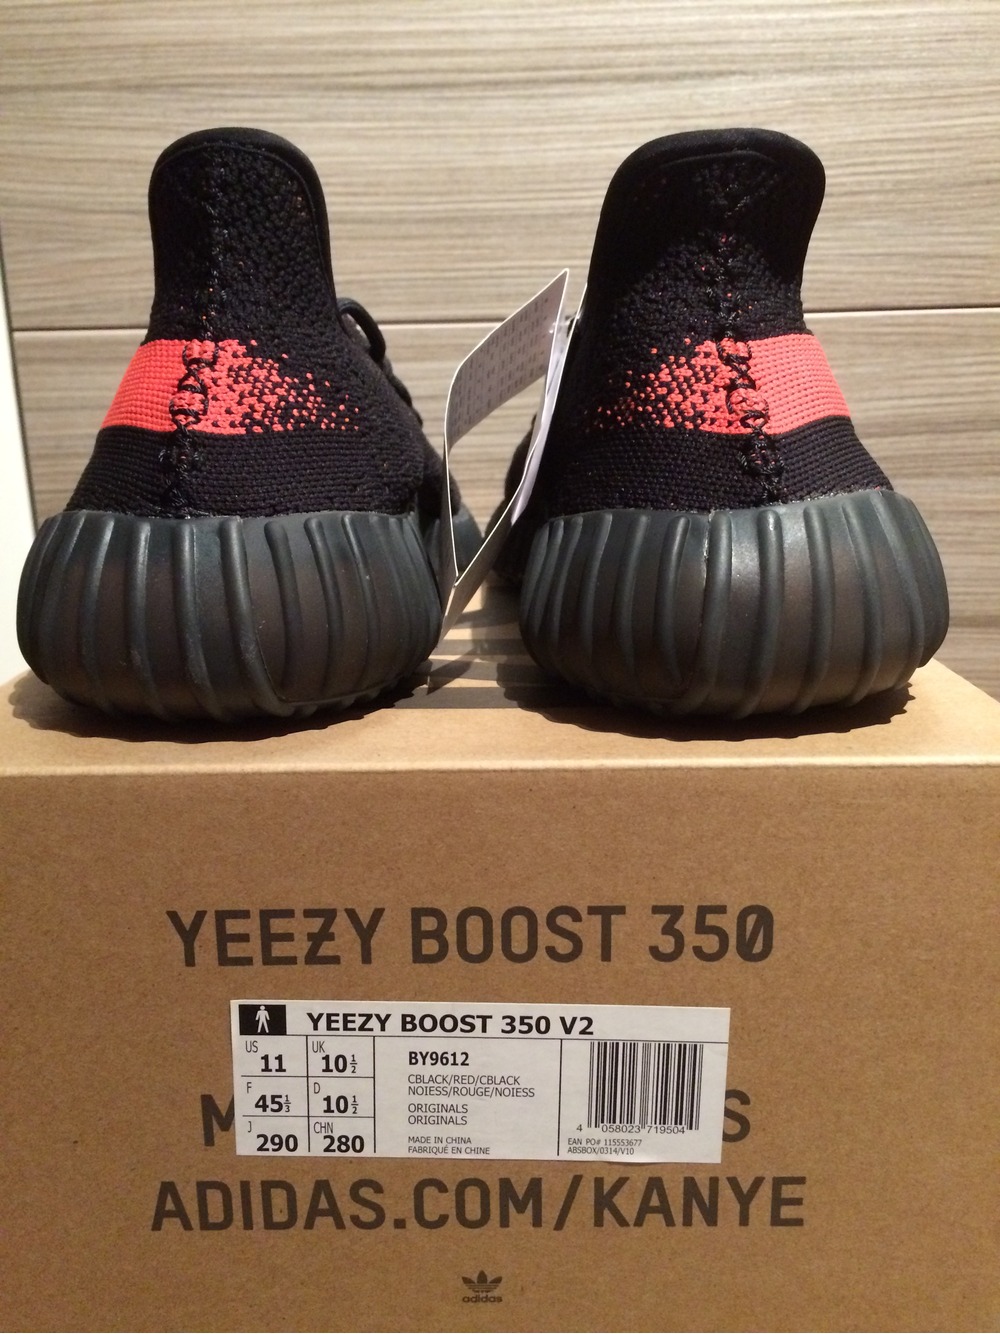 Adidas Yeezy Boost 350 V2 black red NEW !!